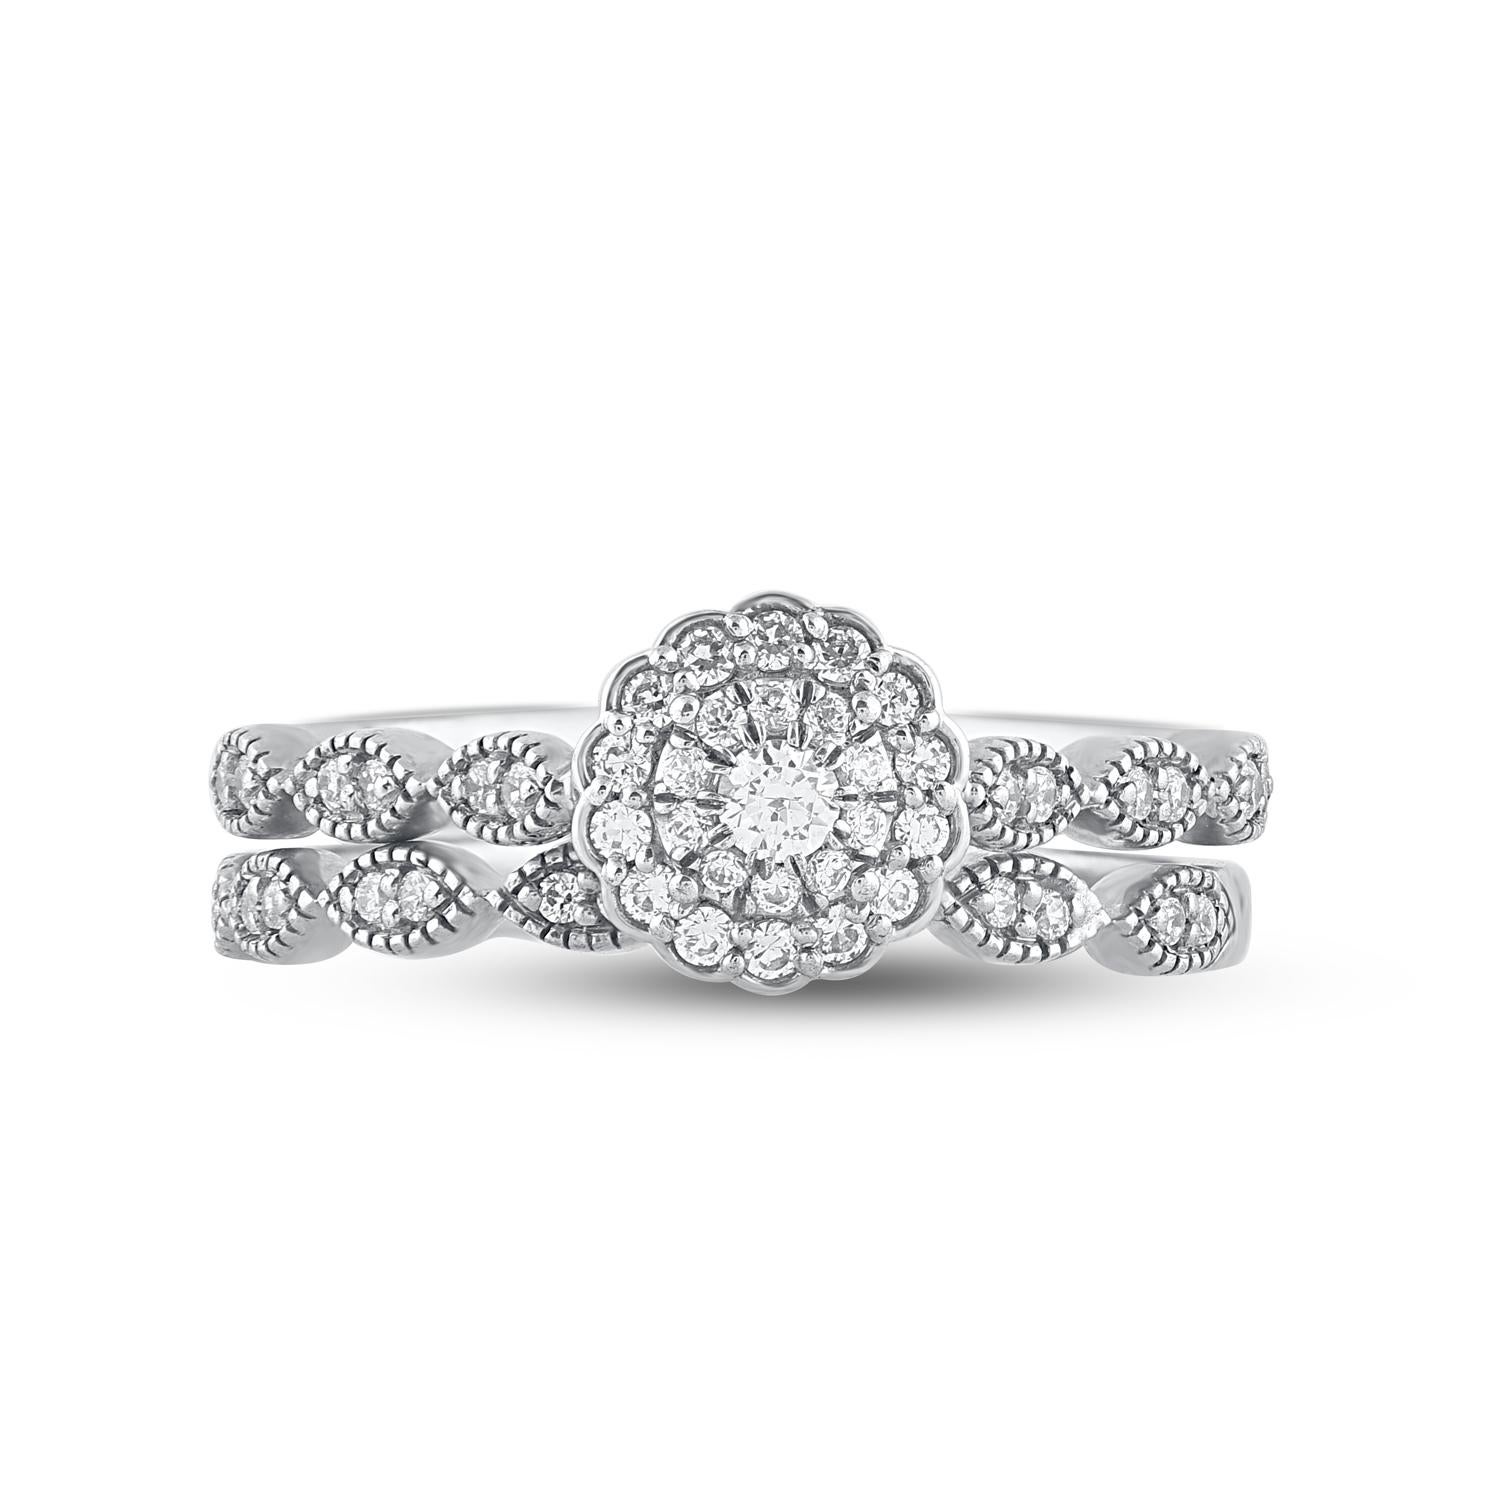 Give her a sophisticated reminder of your love with this diamond ring set. Crafted in 14 Karat white gold. This wedding ring features a sparkling 51 brilliant cut and single cut round diamonds beautifully set in prong & pave setting. The total